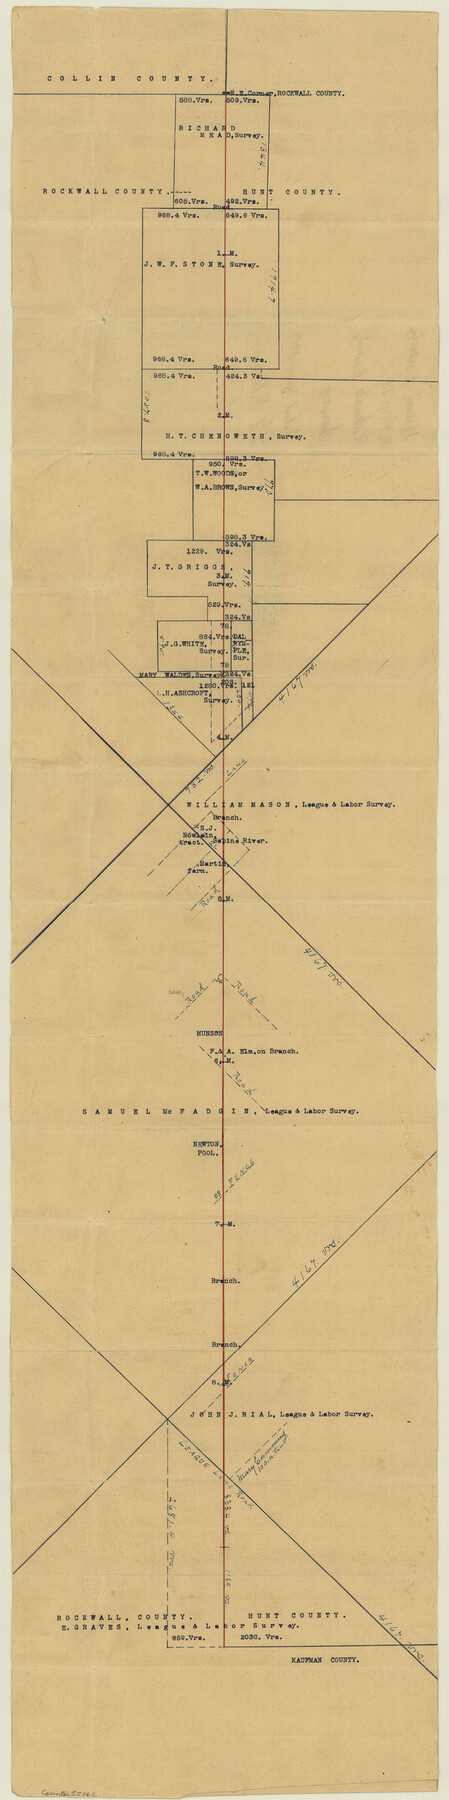 55262, Hunt County Boundary File 10a, General Map Collection